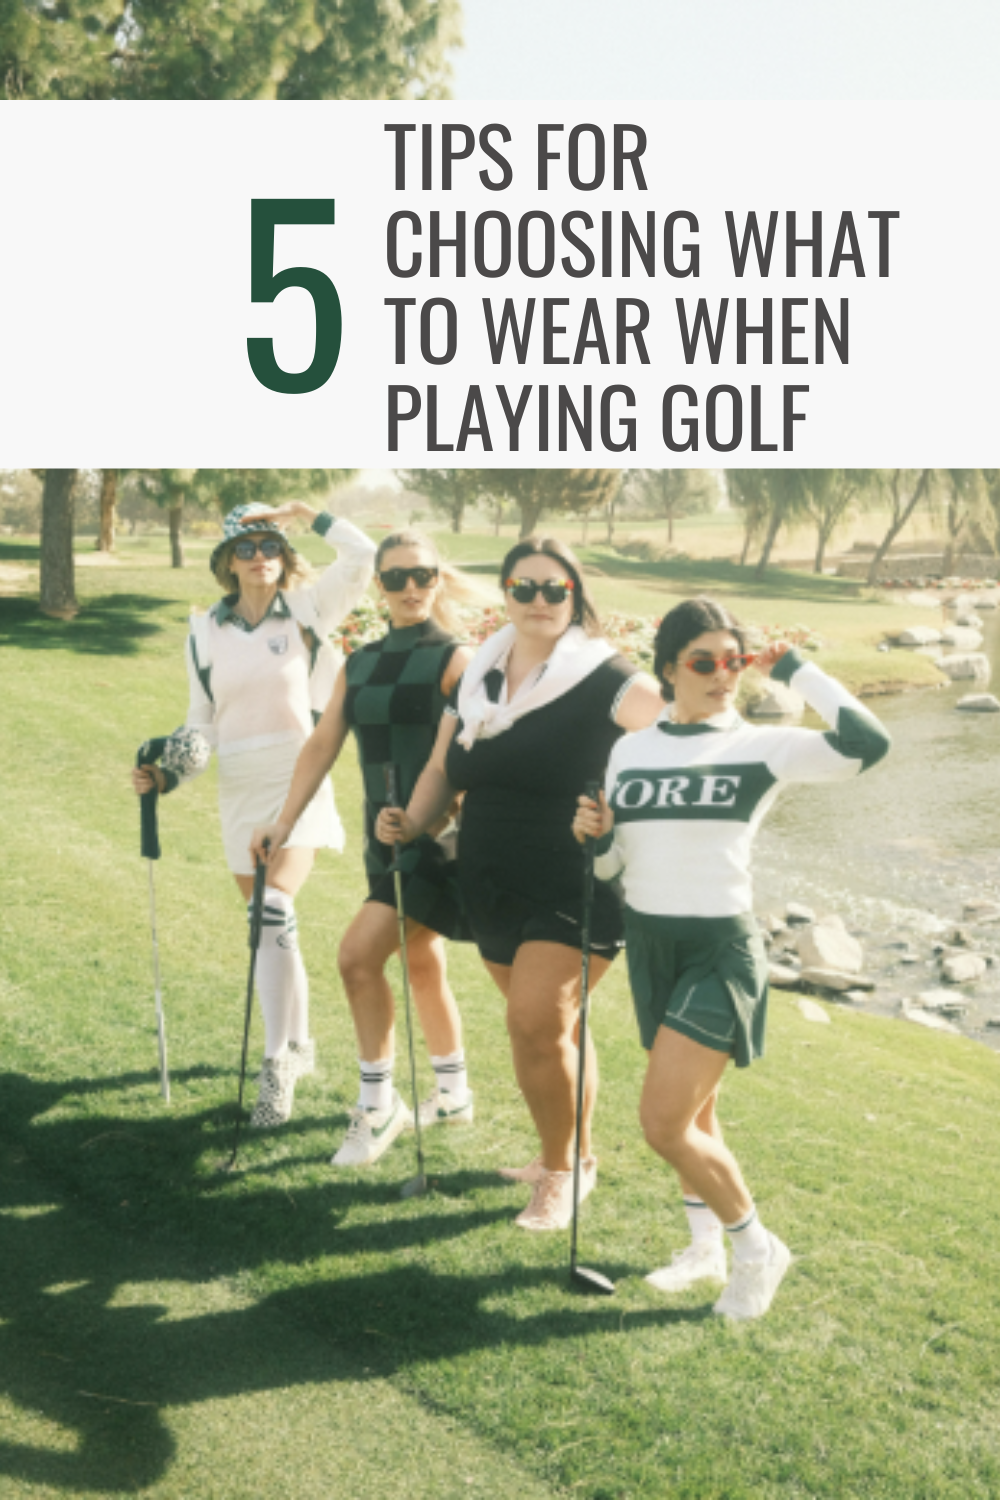 Top 5 Tips For Choosing What To Wear When Playing Golf – foreall.com